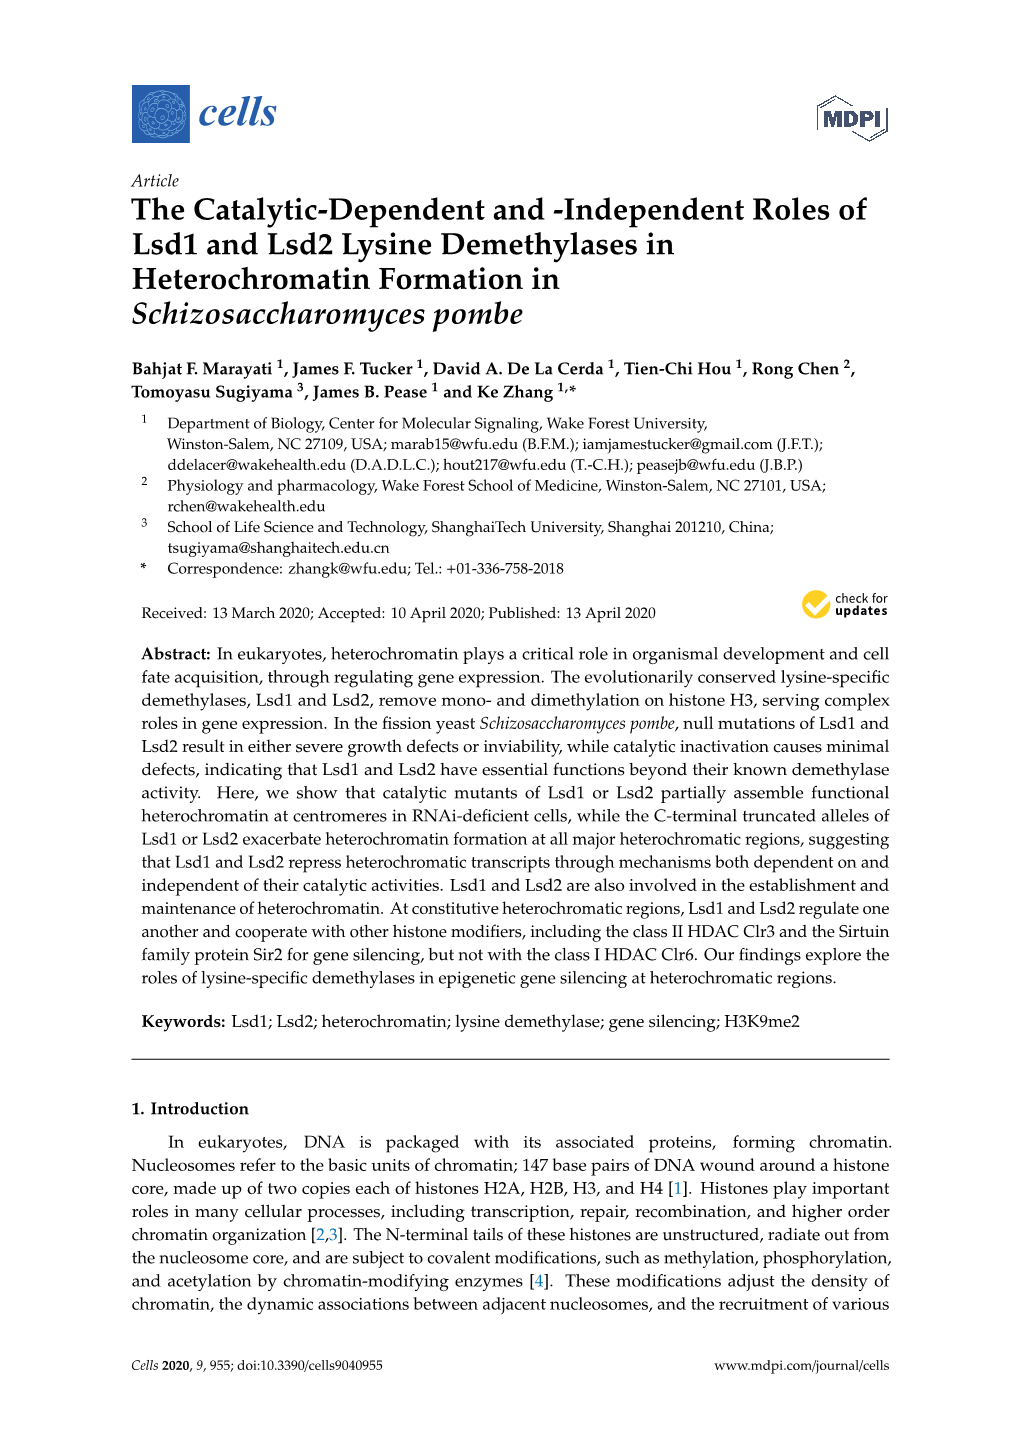 The Catalytic-Dependent and -Independent Roles of Lsd1 and Lsd2 Lysine Demethylases in Heterochromatin Formation in Schizosaccharomyces Pombe